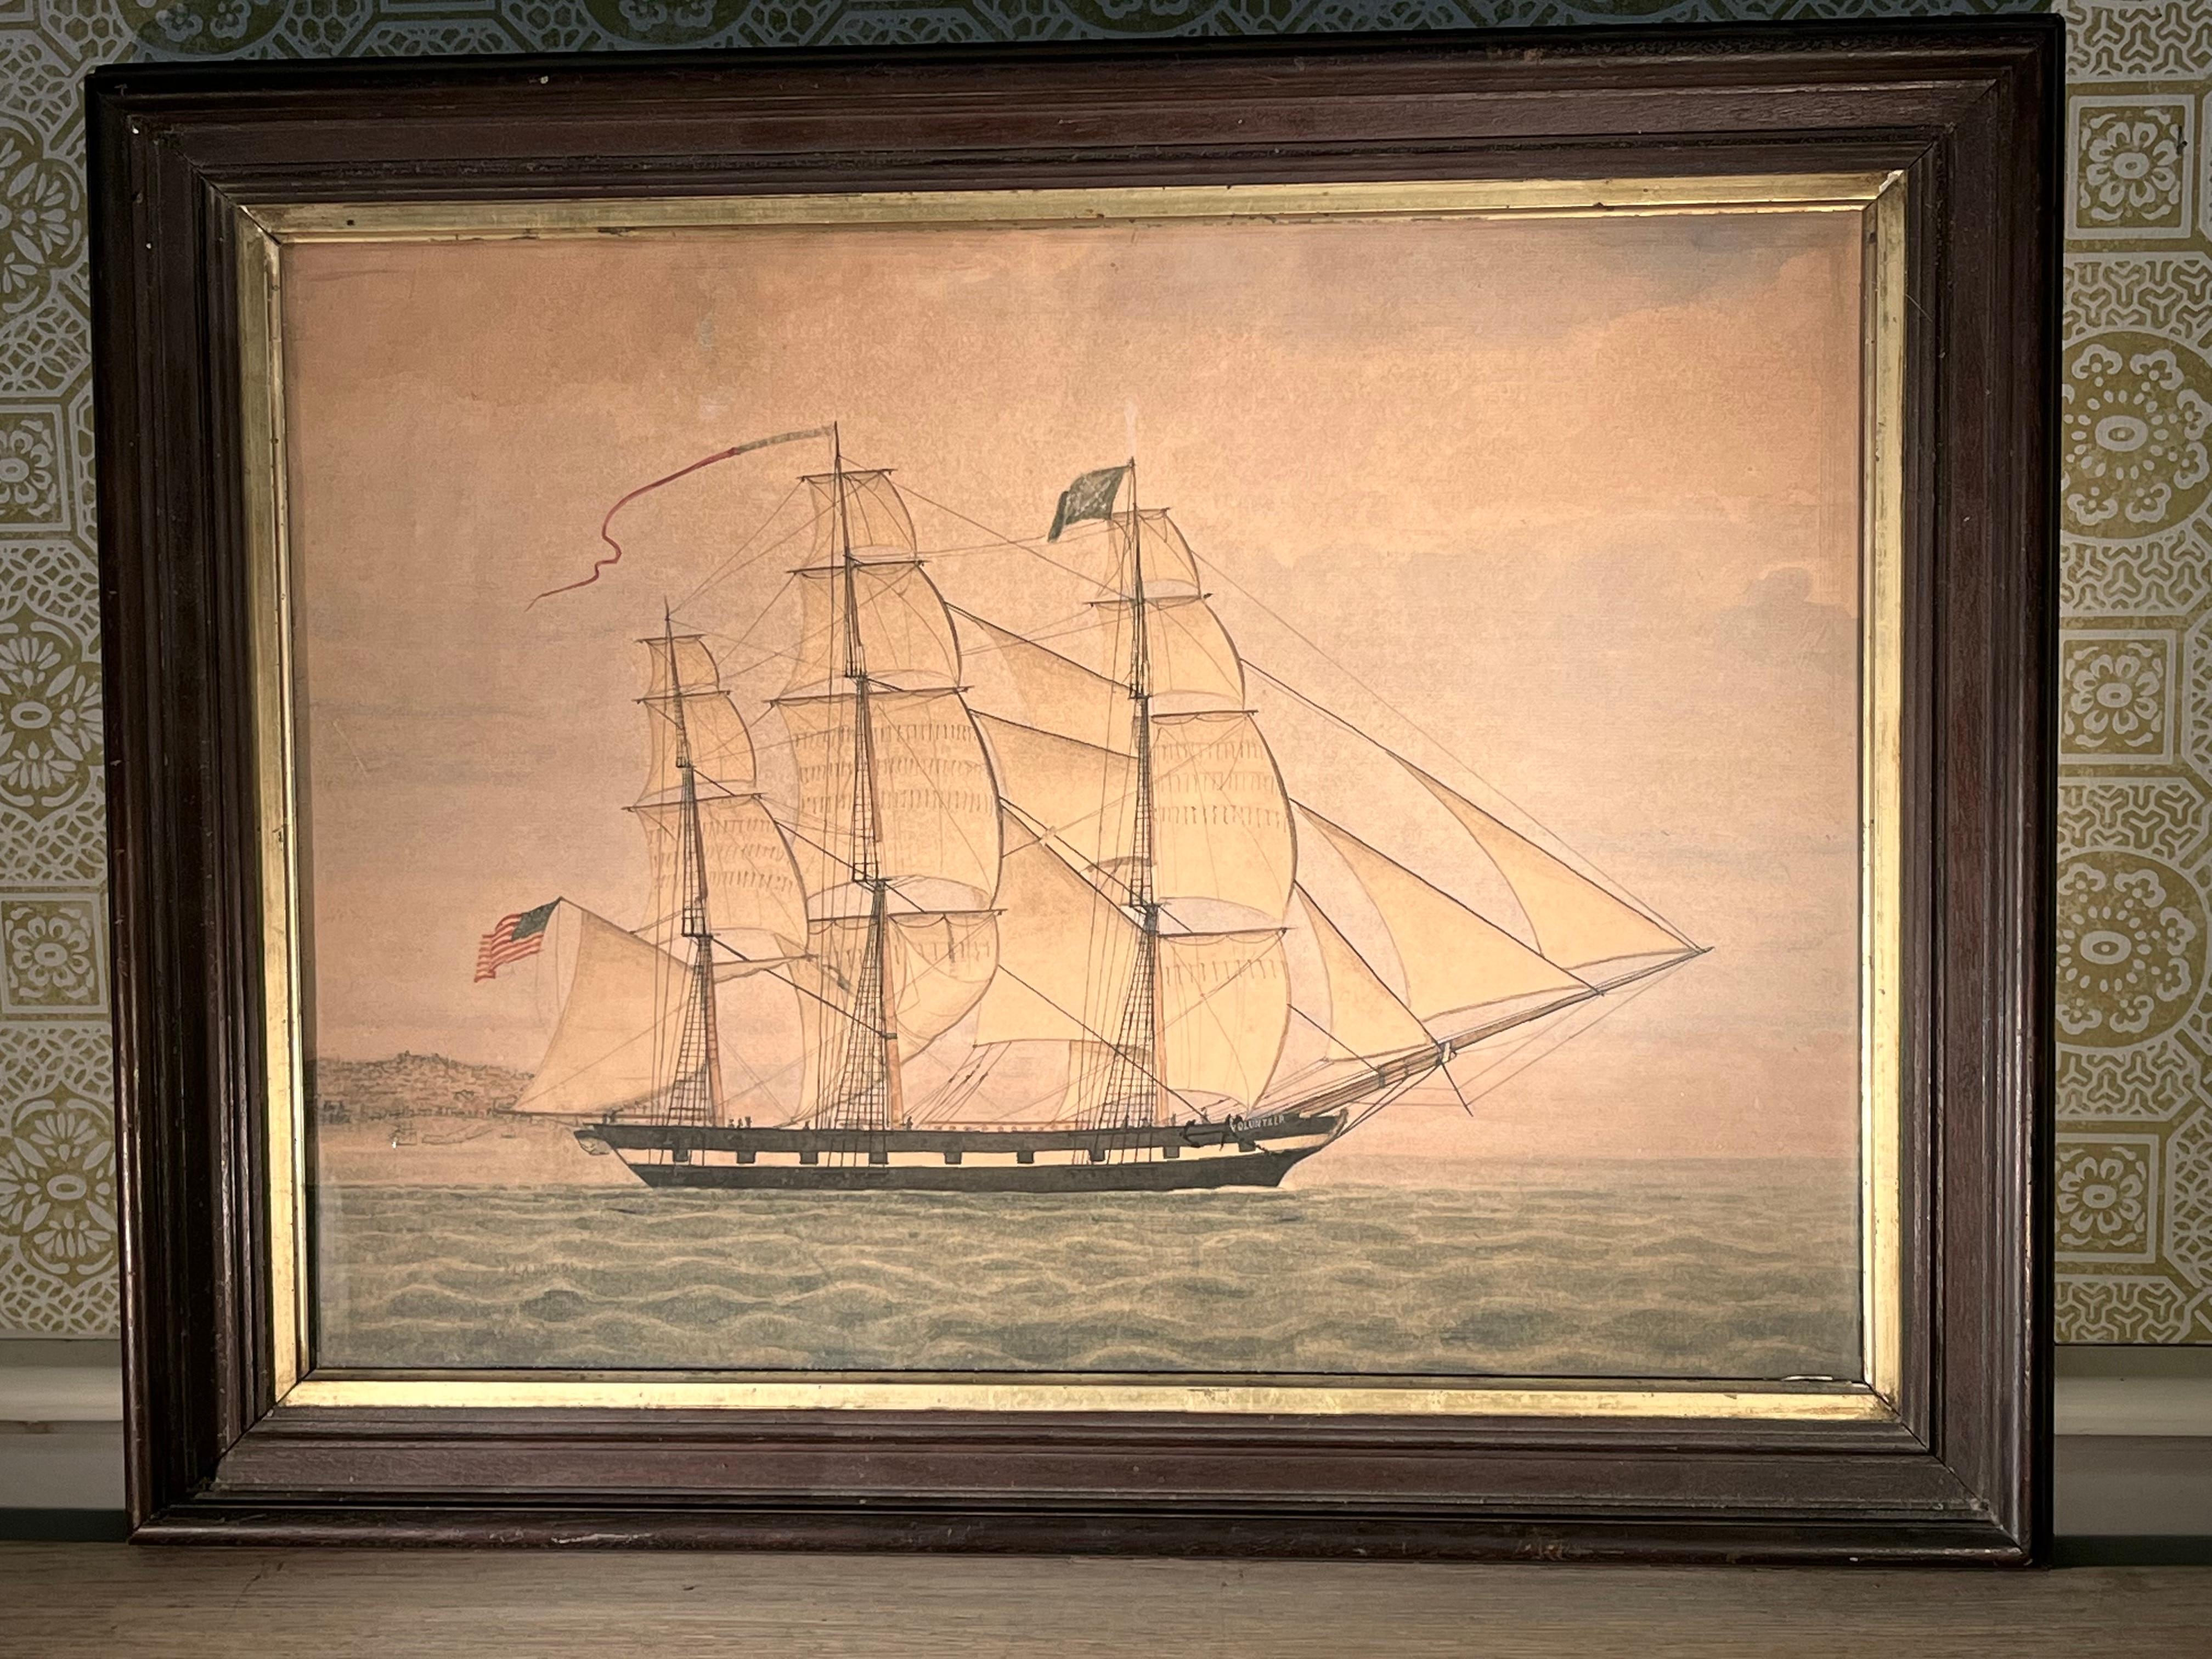 A mid 19th century or earlier watercolor painting on paper of the frigate “Volunteer” flying the American flag and a single flag depicting a star composed of stars. Signed indistinctly LA BRIOSS lower left. Nice condition, framed under glass in a